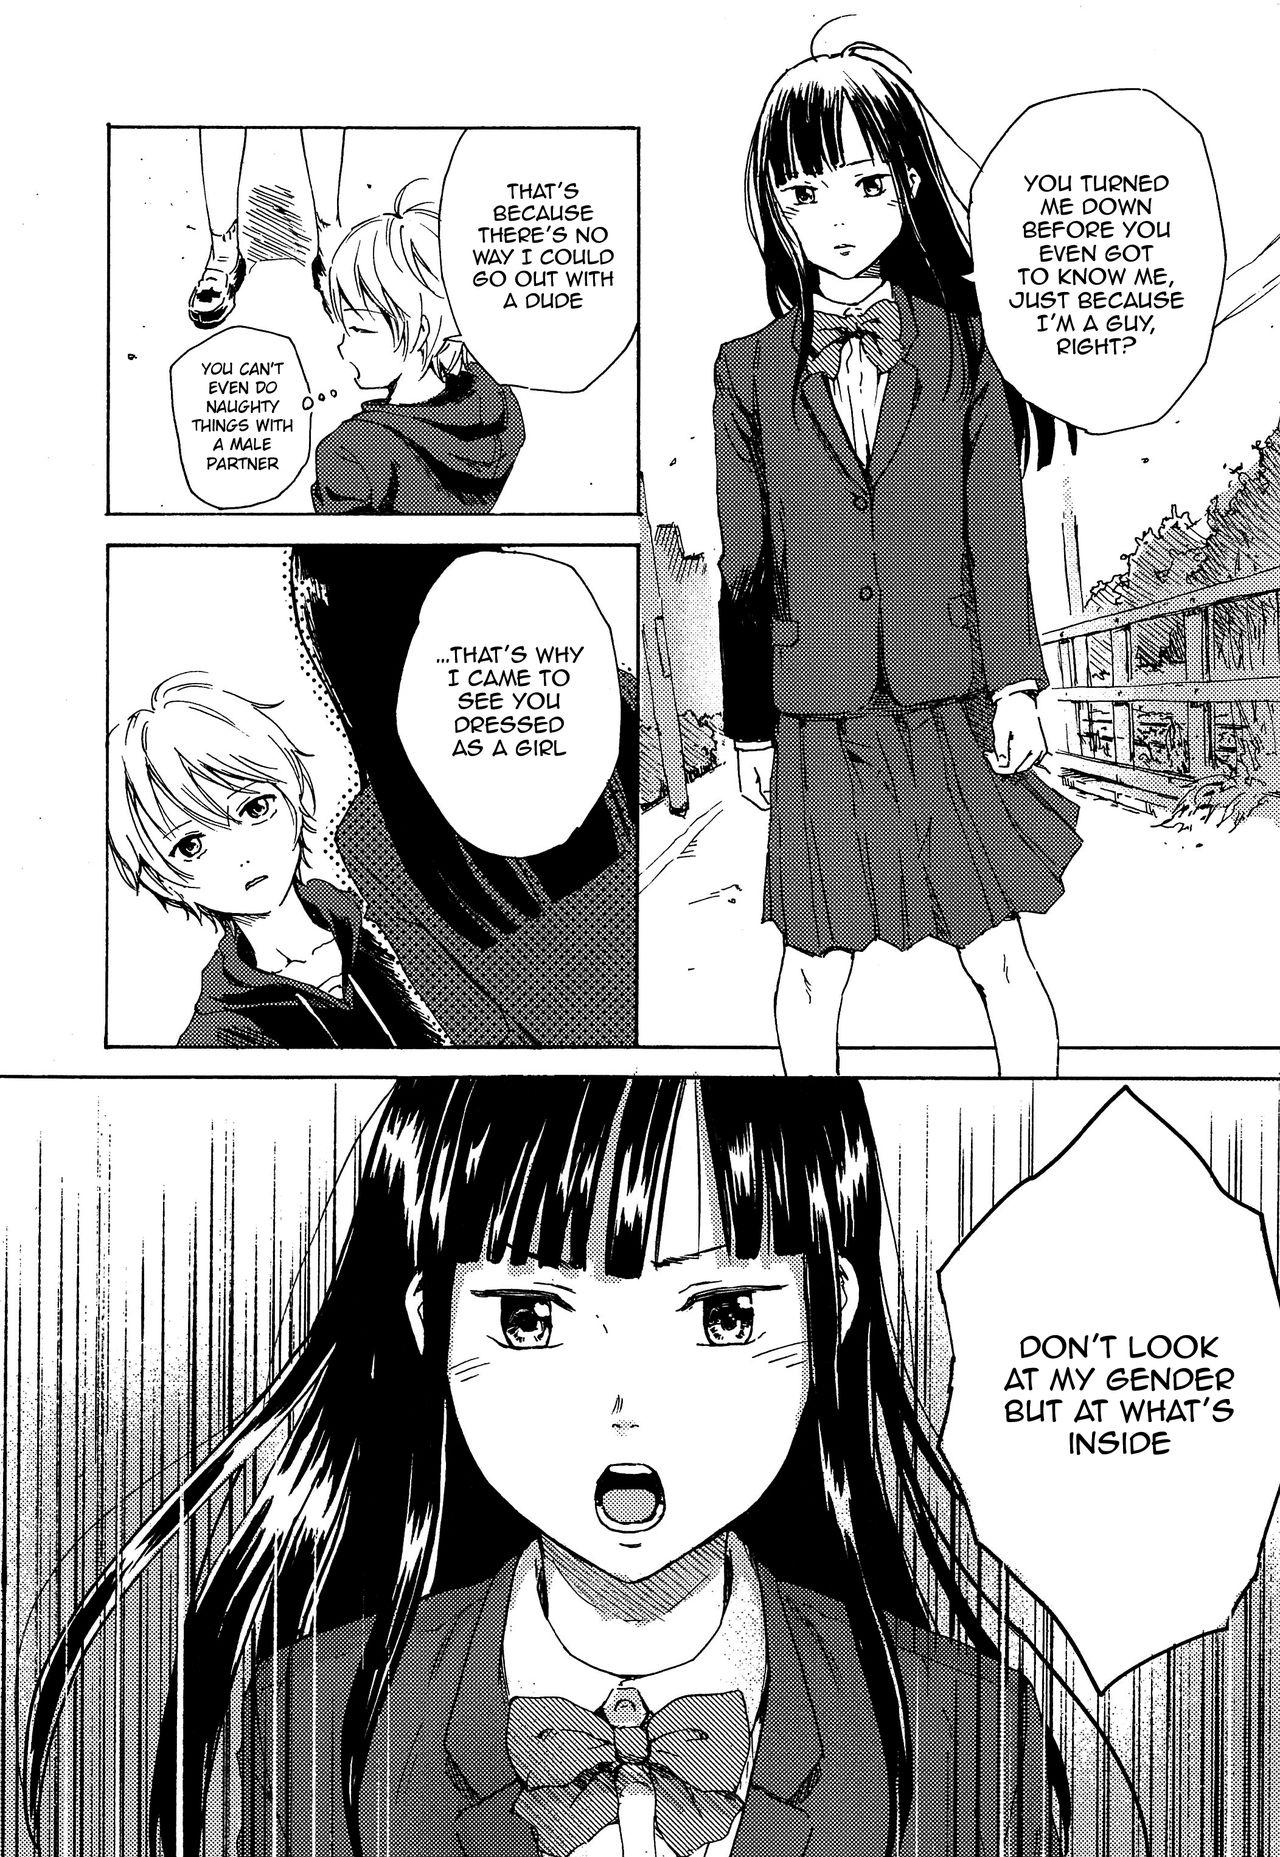 Groupfuck Skirt in the Kataomoi | Skirt in the Unrequited Love - Original Coed - Page 11